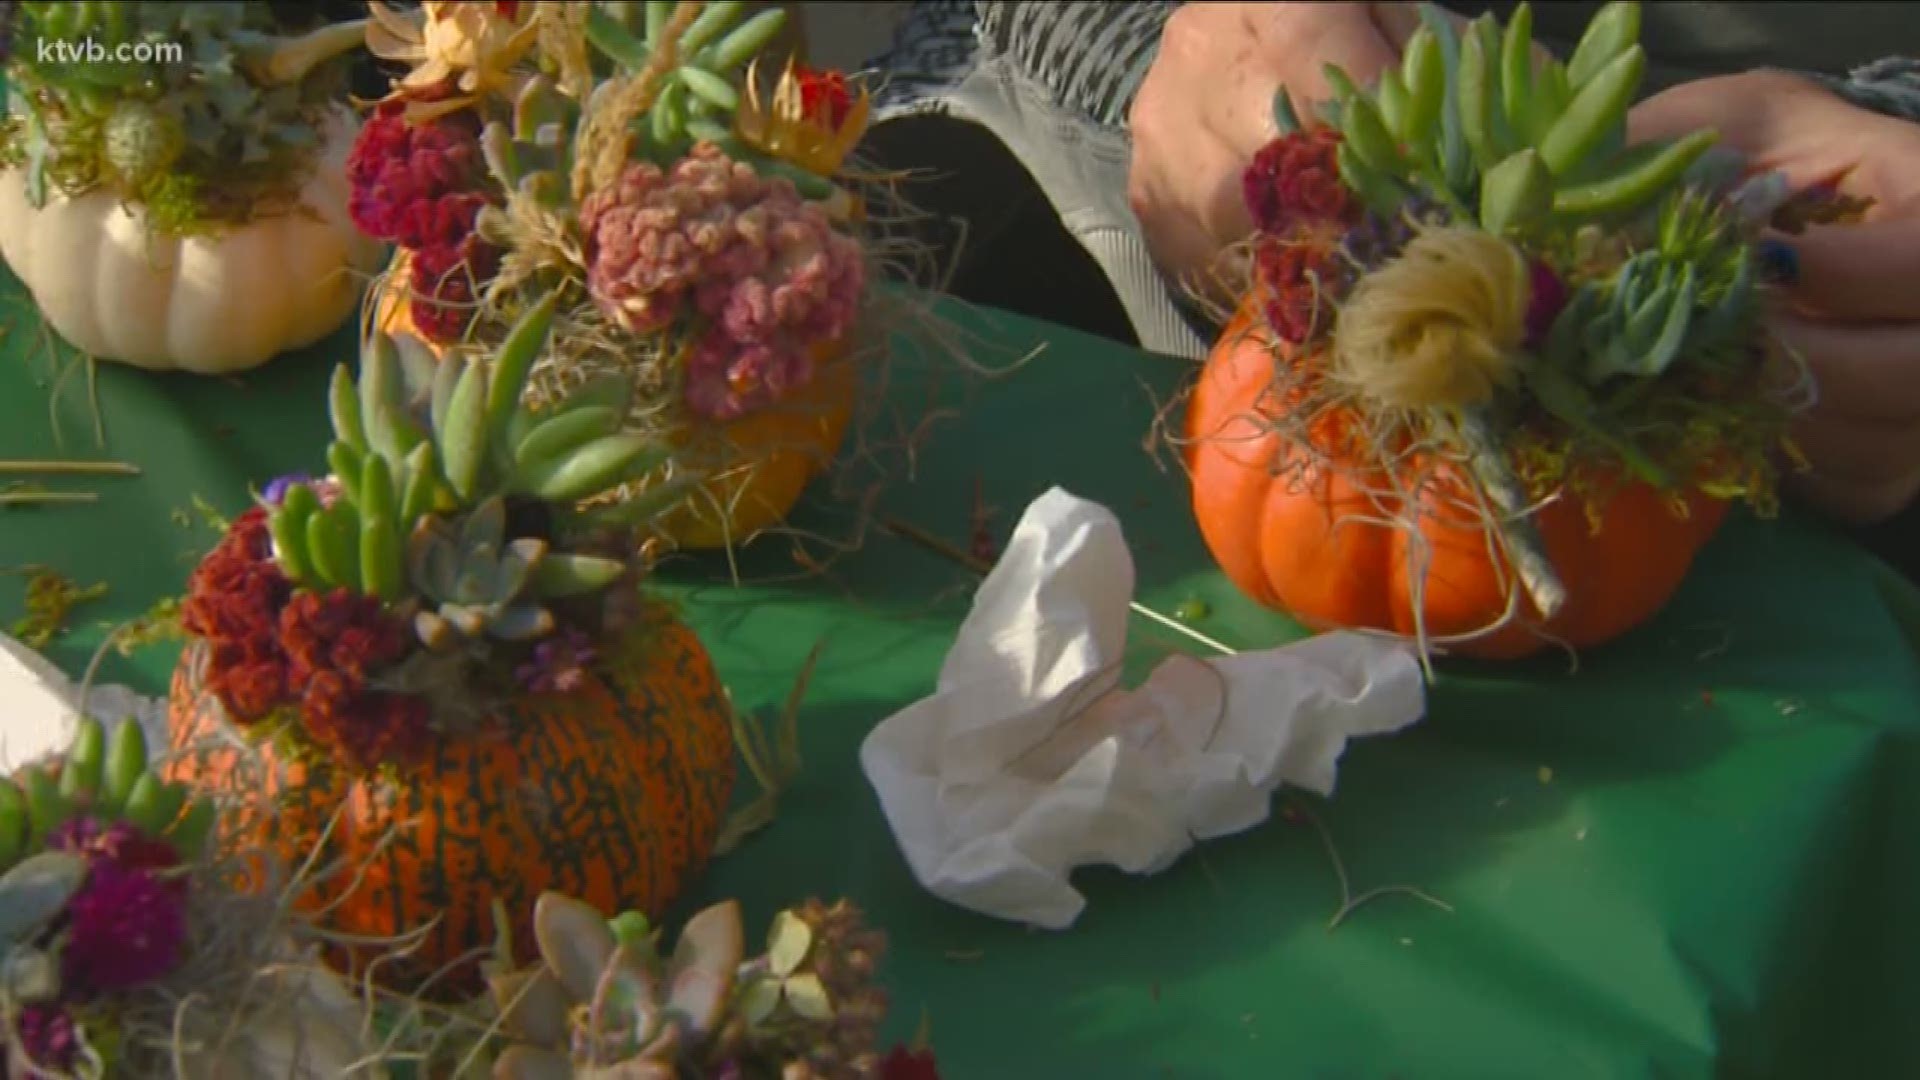 These pumpkins aren’t being carved into scary faces. Instead, they’re being turned into creative displays, using succulent plants and dried flowers.